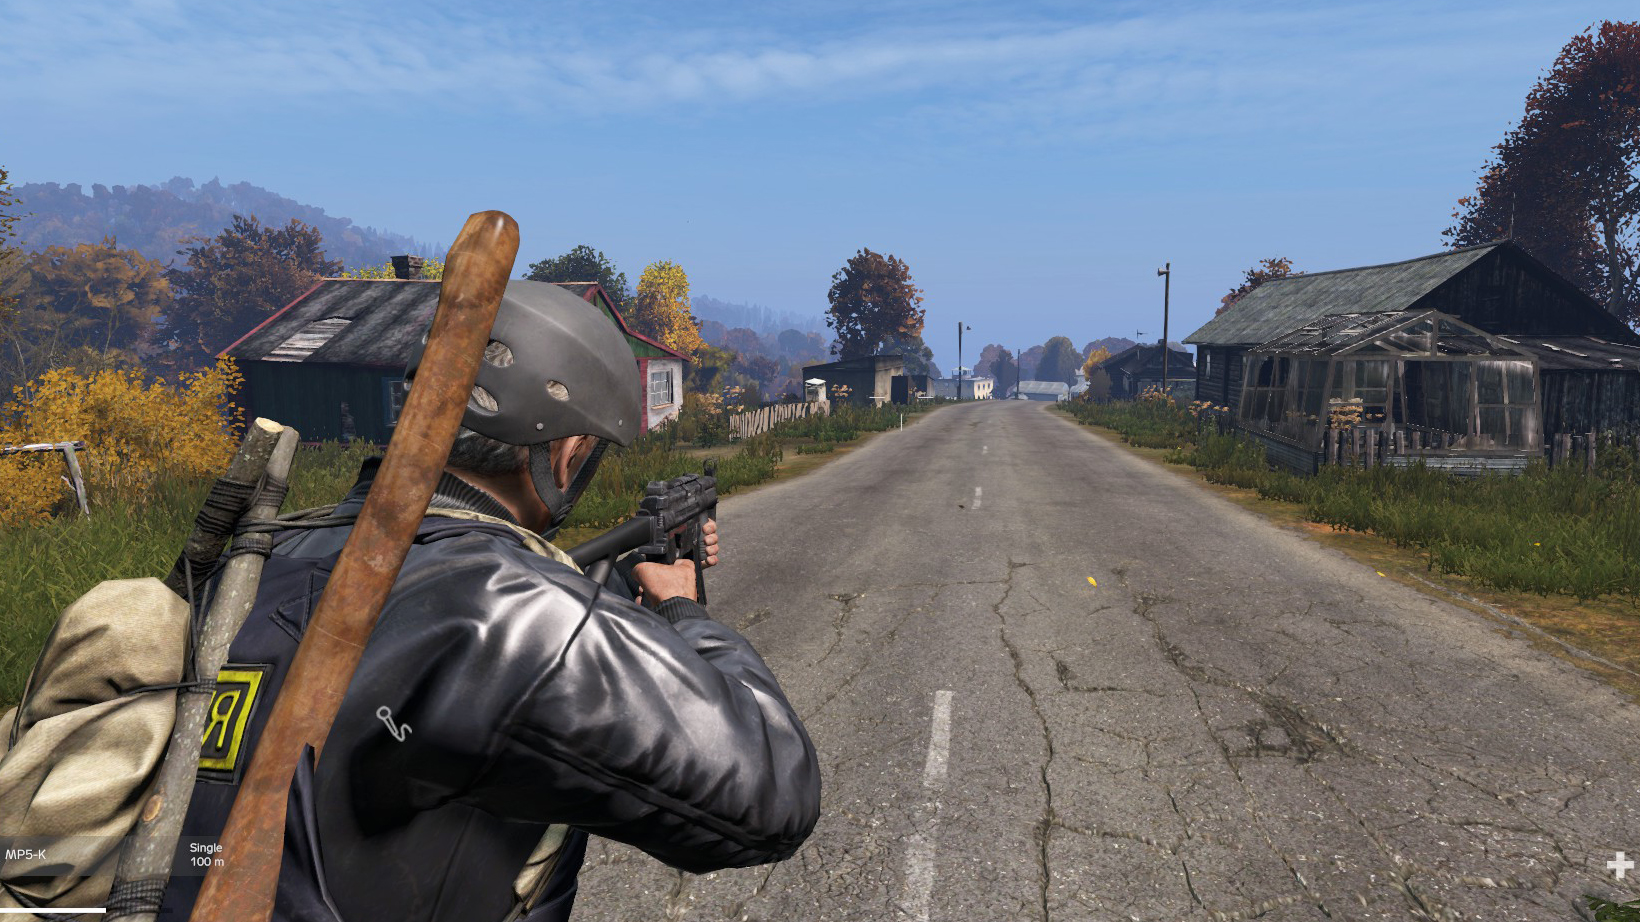 I returned to DayZ after almost 4 years, but it feels like I never